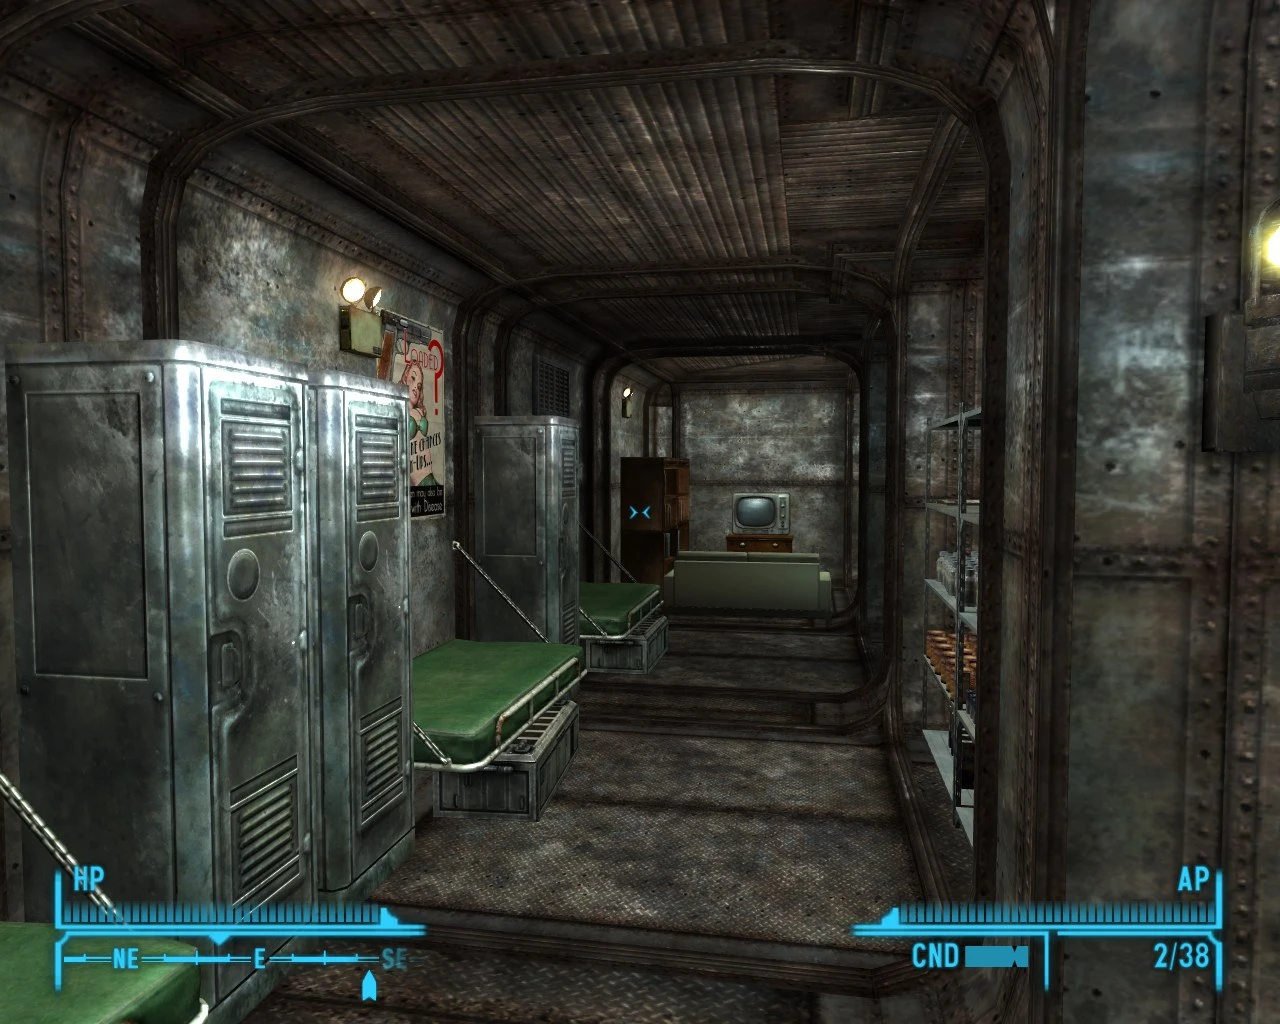 Goodsprings Home Fallout Shelter Safehouse At Fallout New Vegas